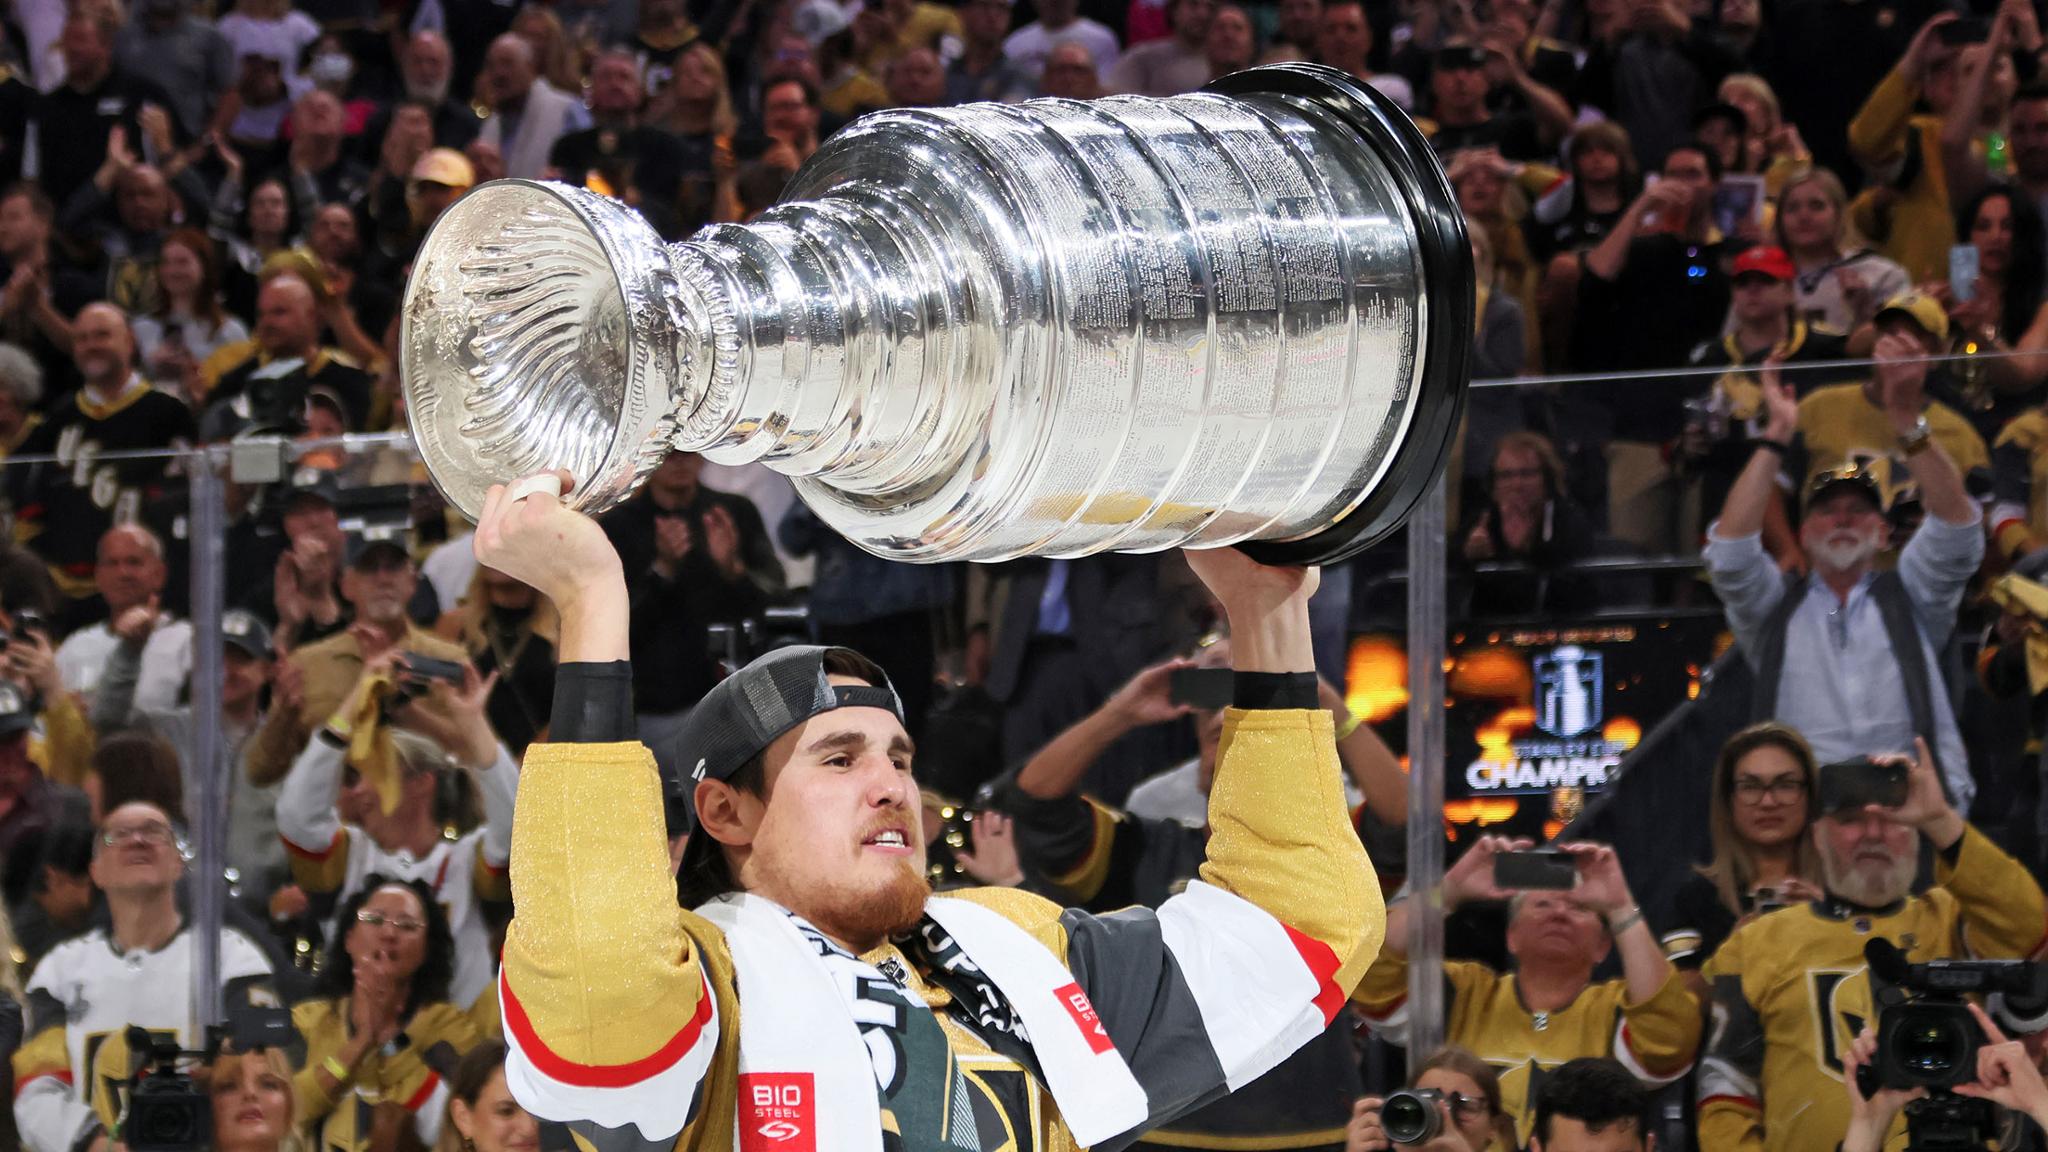 First Nation defenceman captures Stanley Cup with Vegas teammates